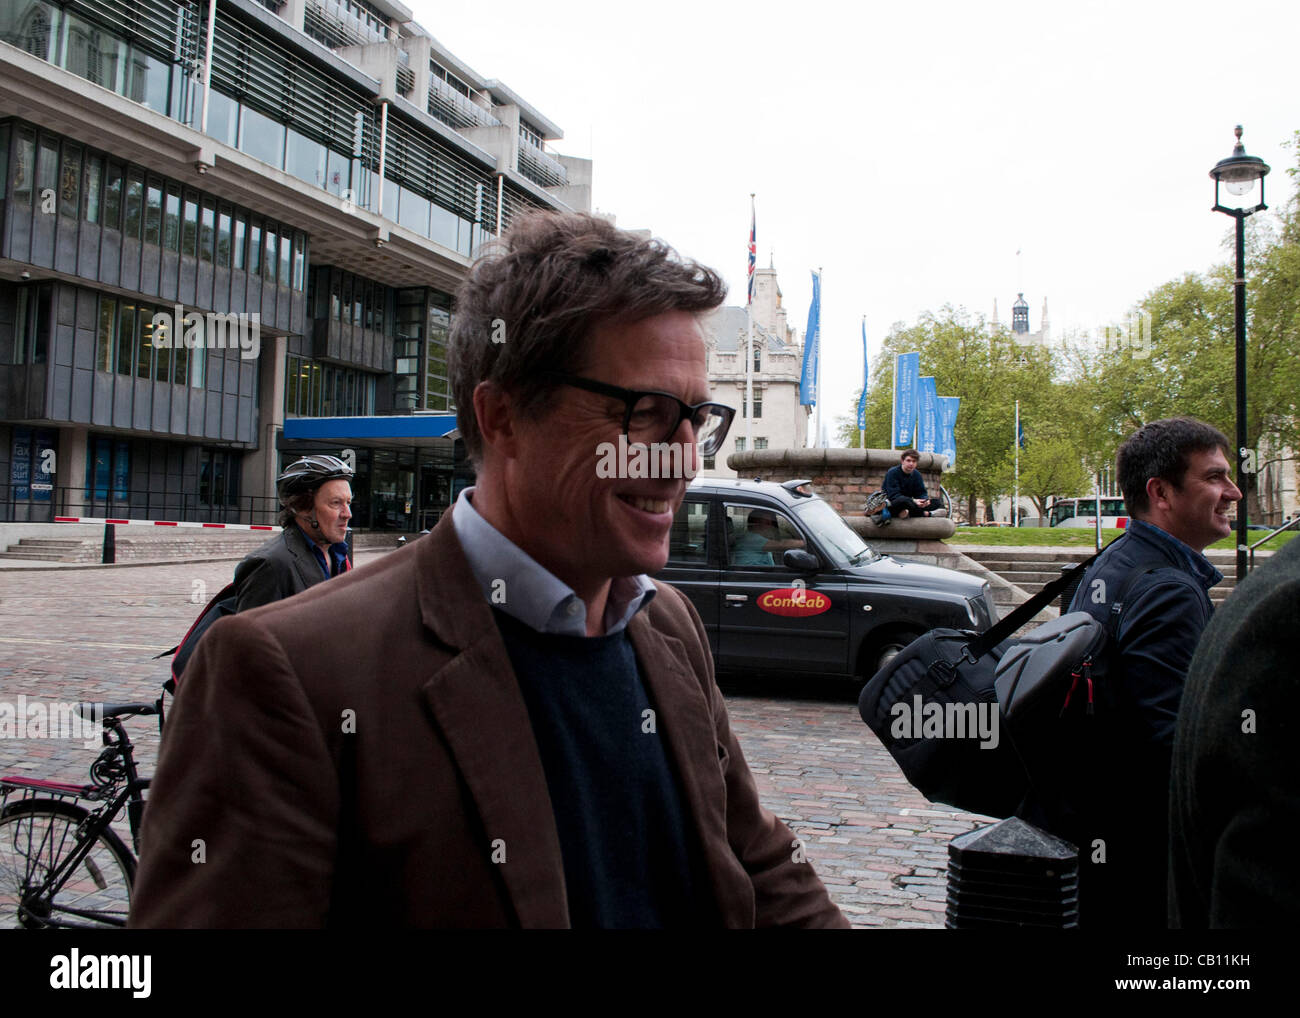 London, UK. 17/05/12. Actor Hugh Grant attends Hacked Off, the Coordinating Committee for Media Reform at the Central Methodist Church, London. Stock Photo